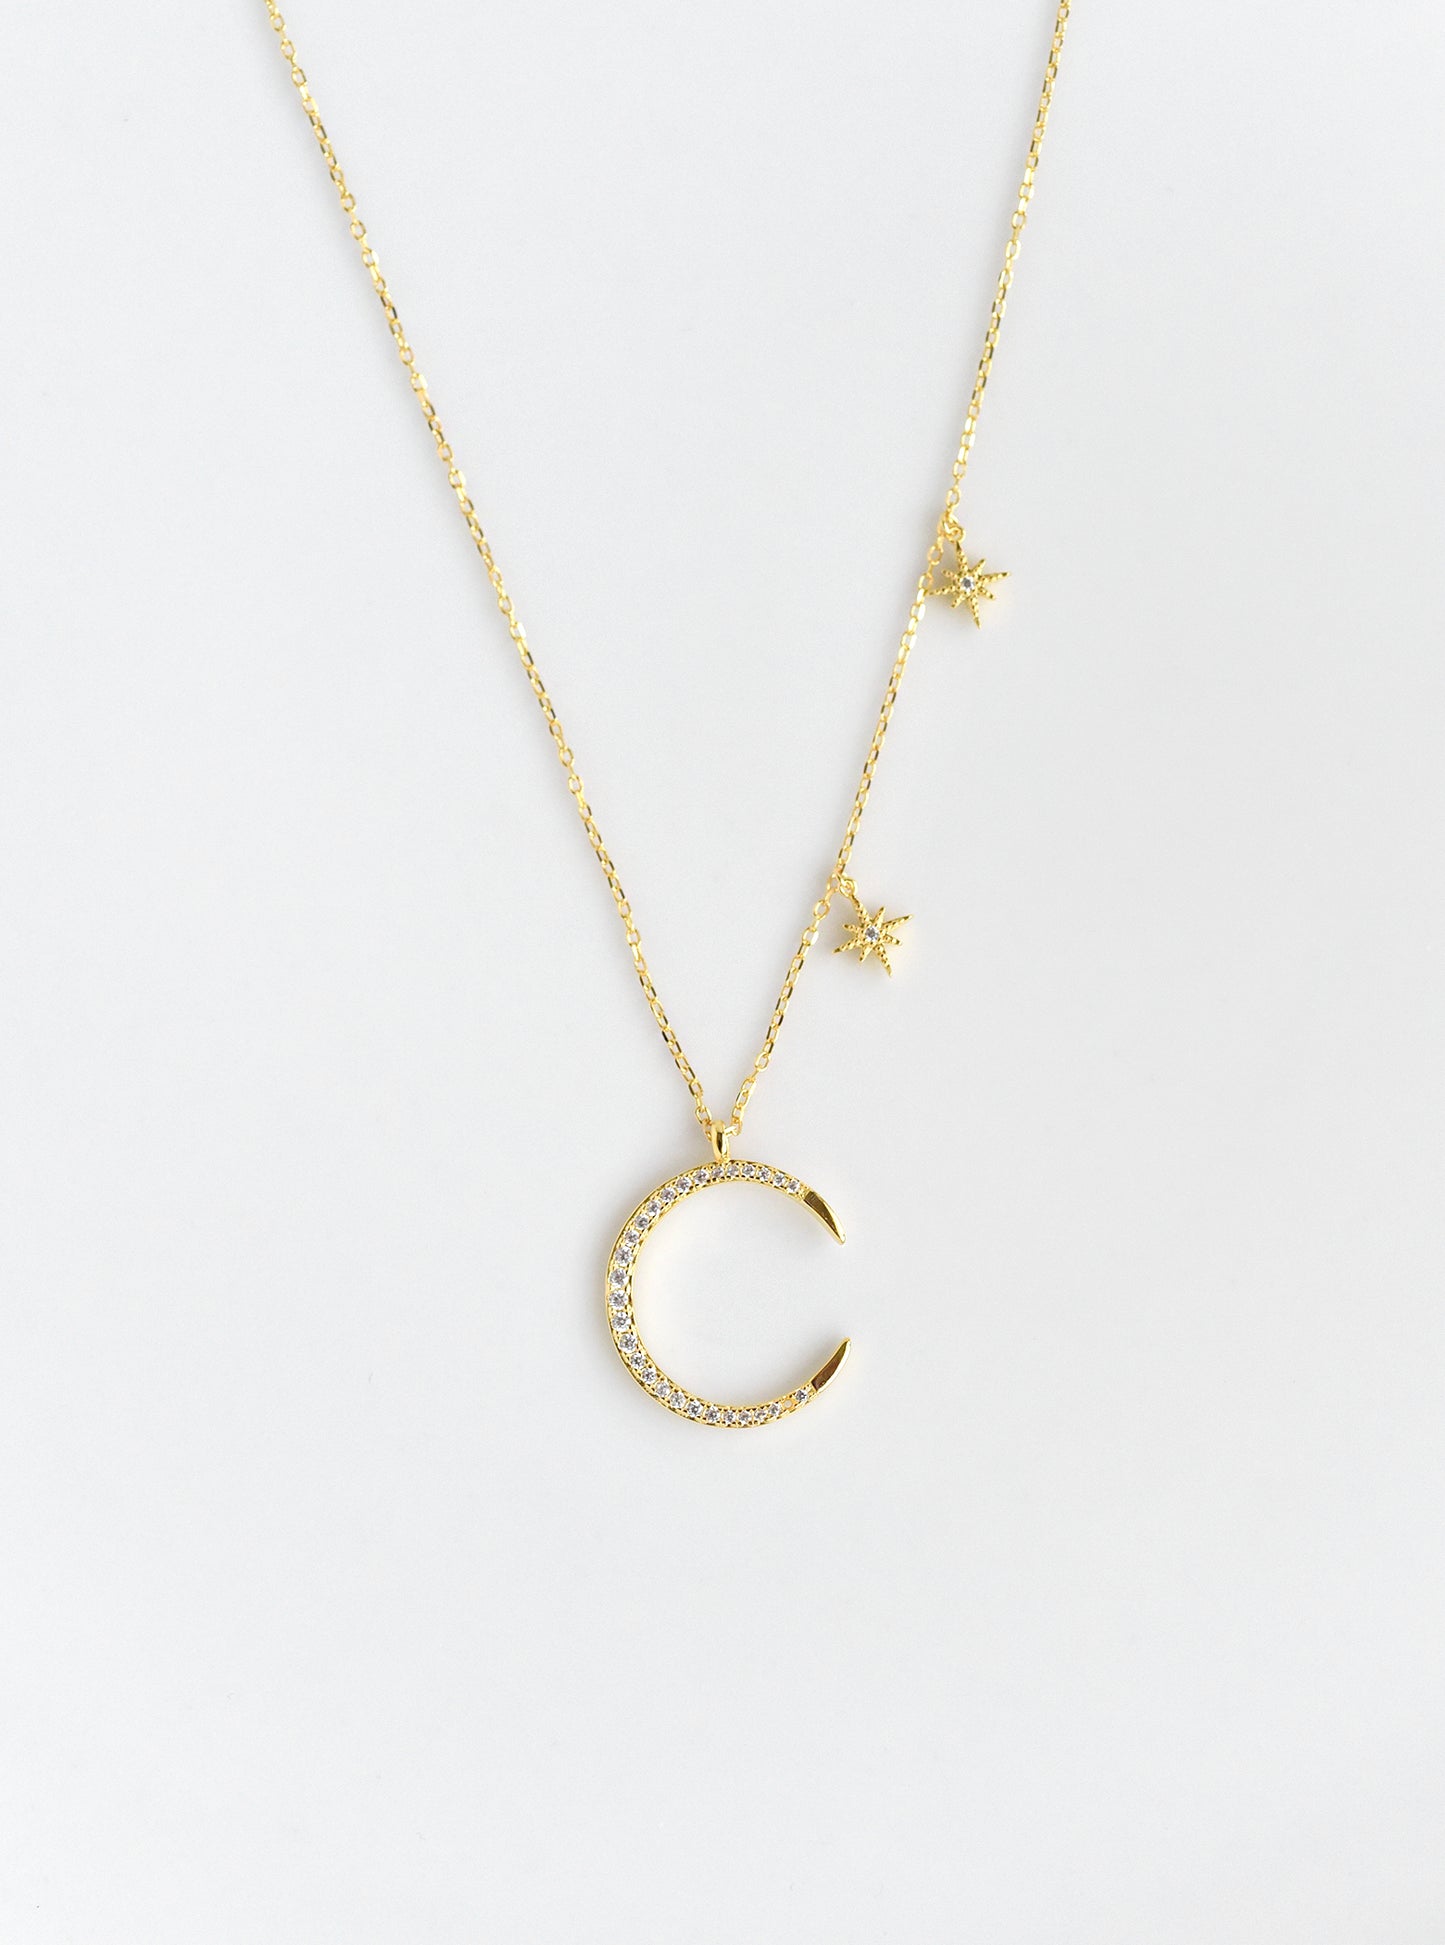 Crescent Moon with 2 Dangling Stars Necklace